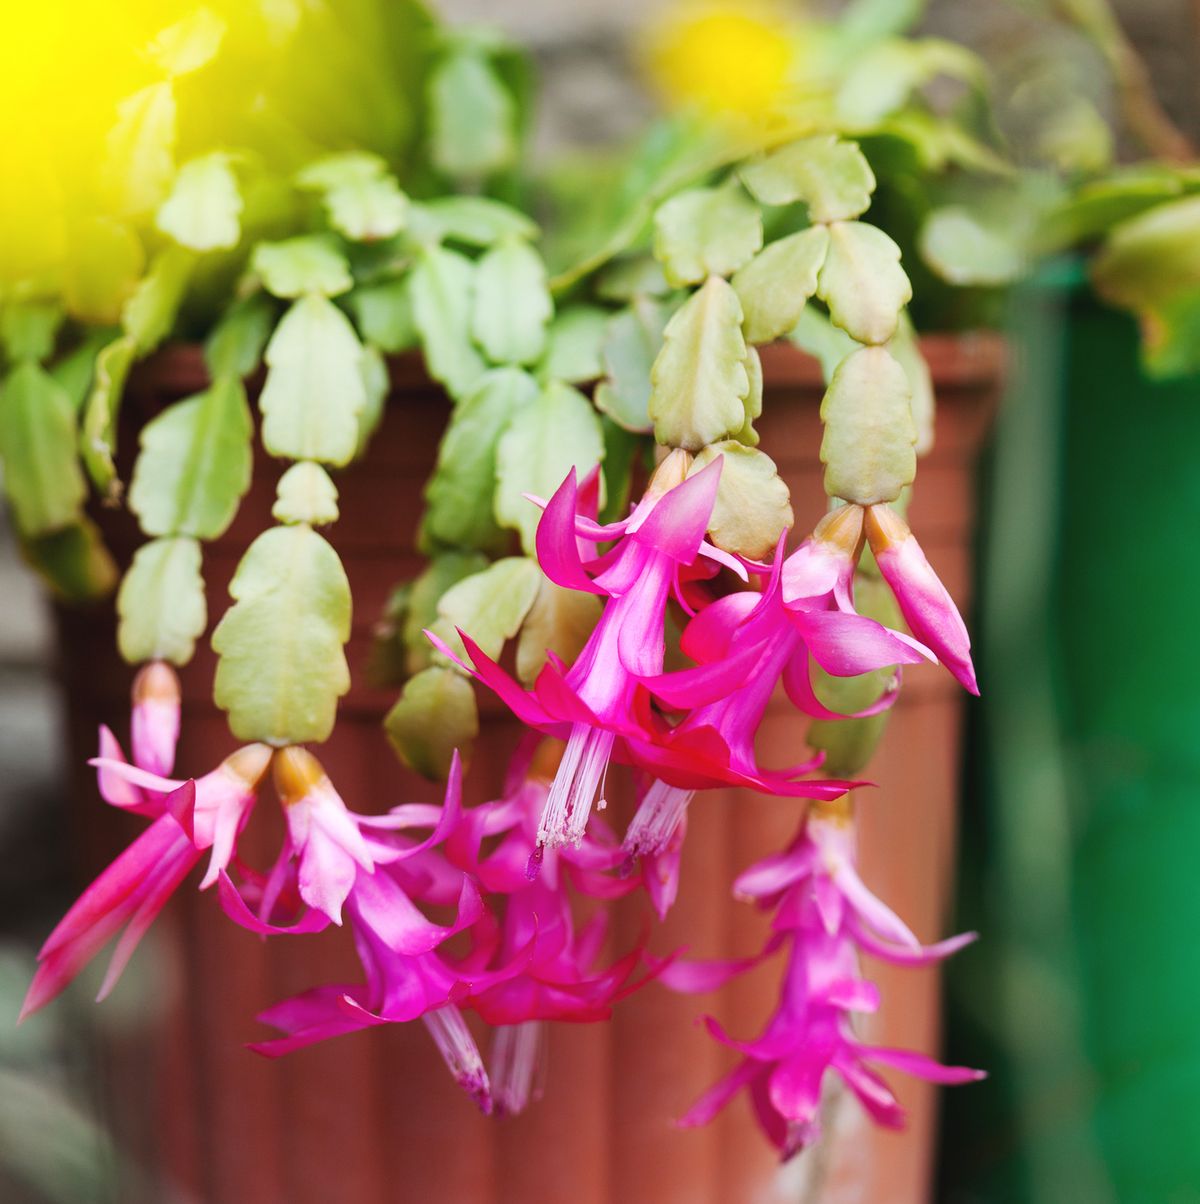 How to Care for a Christmas Cactus With Expert Gardening Tips